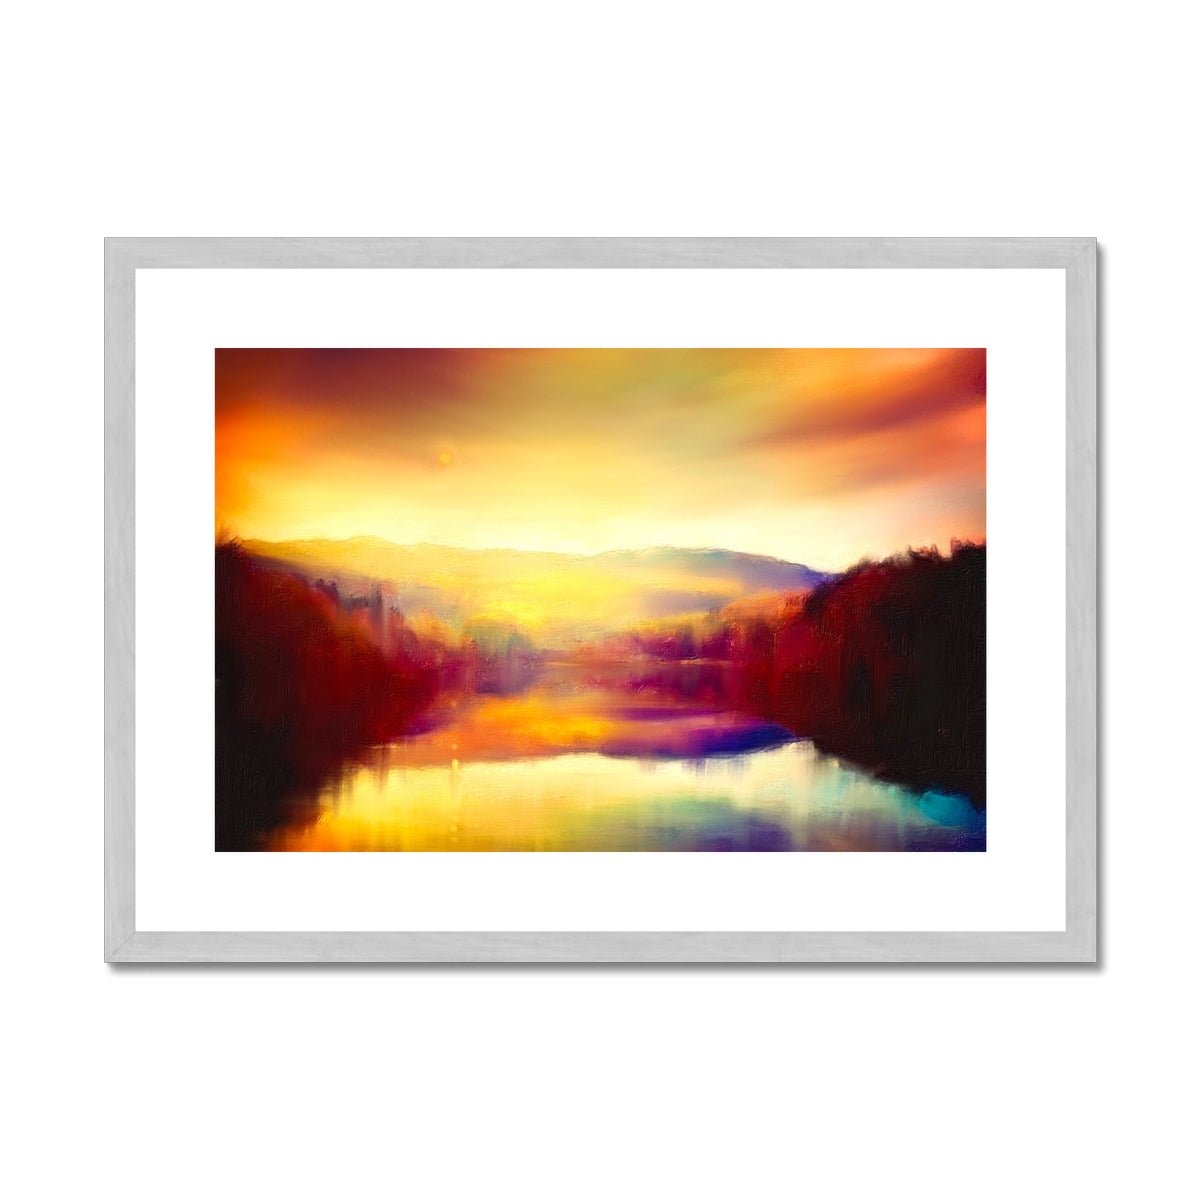 Loch Faskally Dusk Painting | Antique Framed & Mounted Prints From Scotland-Antique Framed & Mounted Prints-Scottish Lochs & Mountains Art Gallery-A2 Landscape-Silver Frame-Paintings, Prints, Homeware, Art Gifts From Scotland By Scottish Artist Kevin Hunter